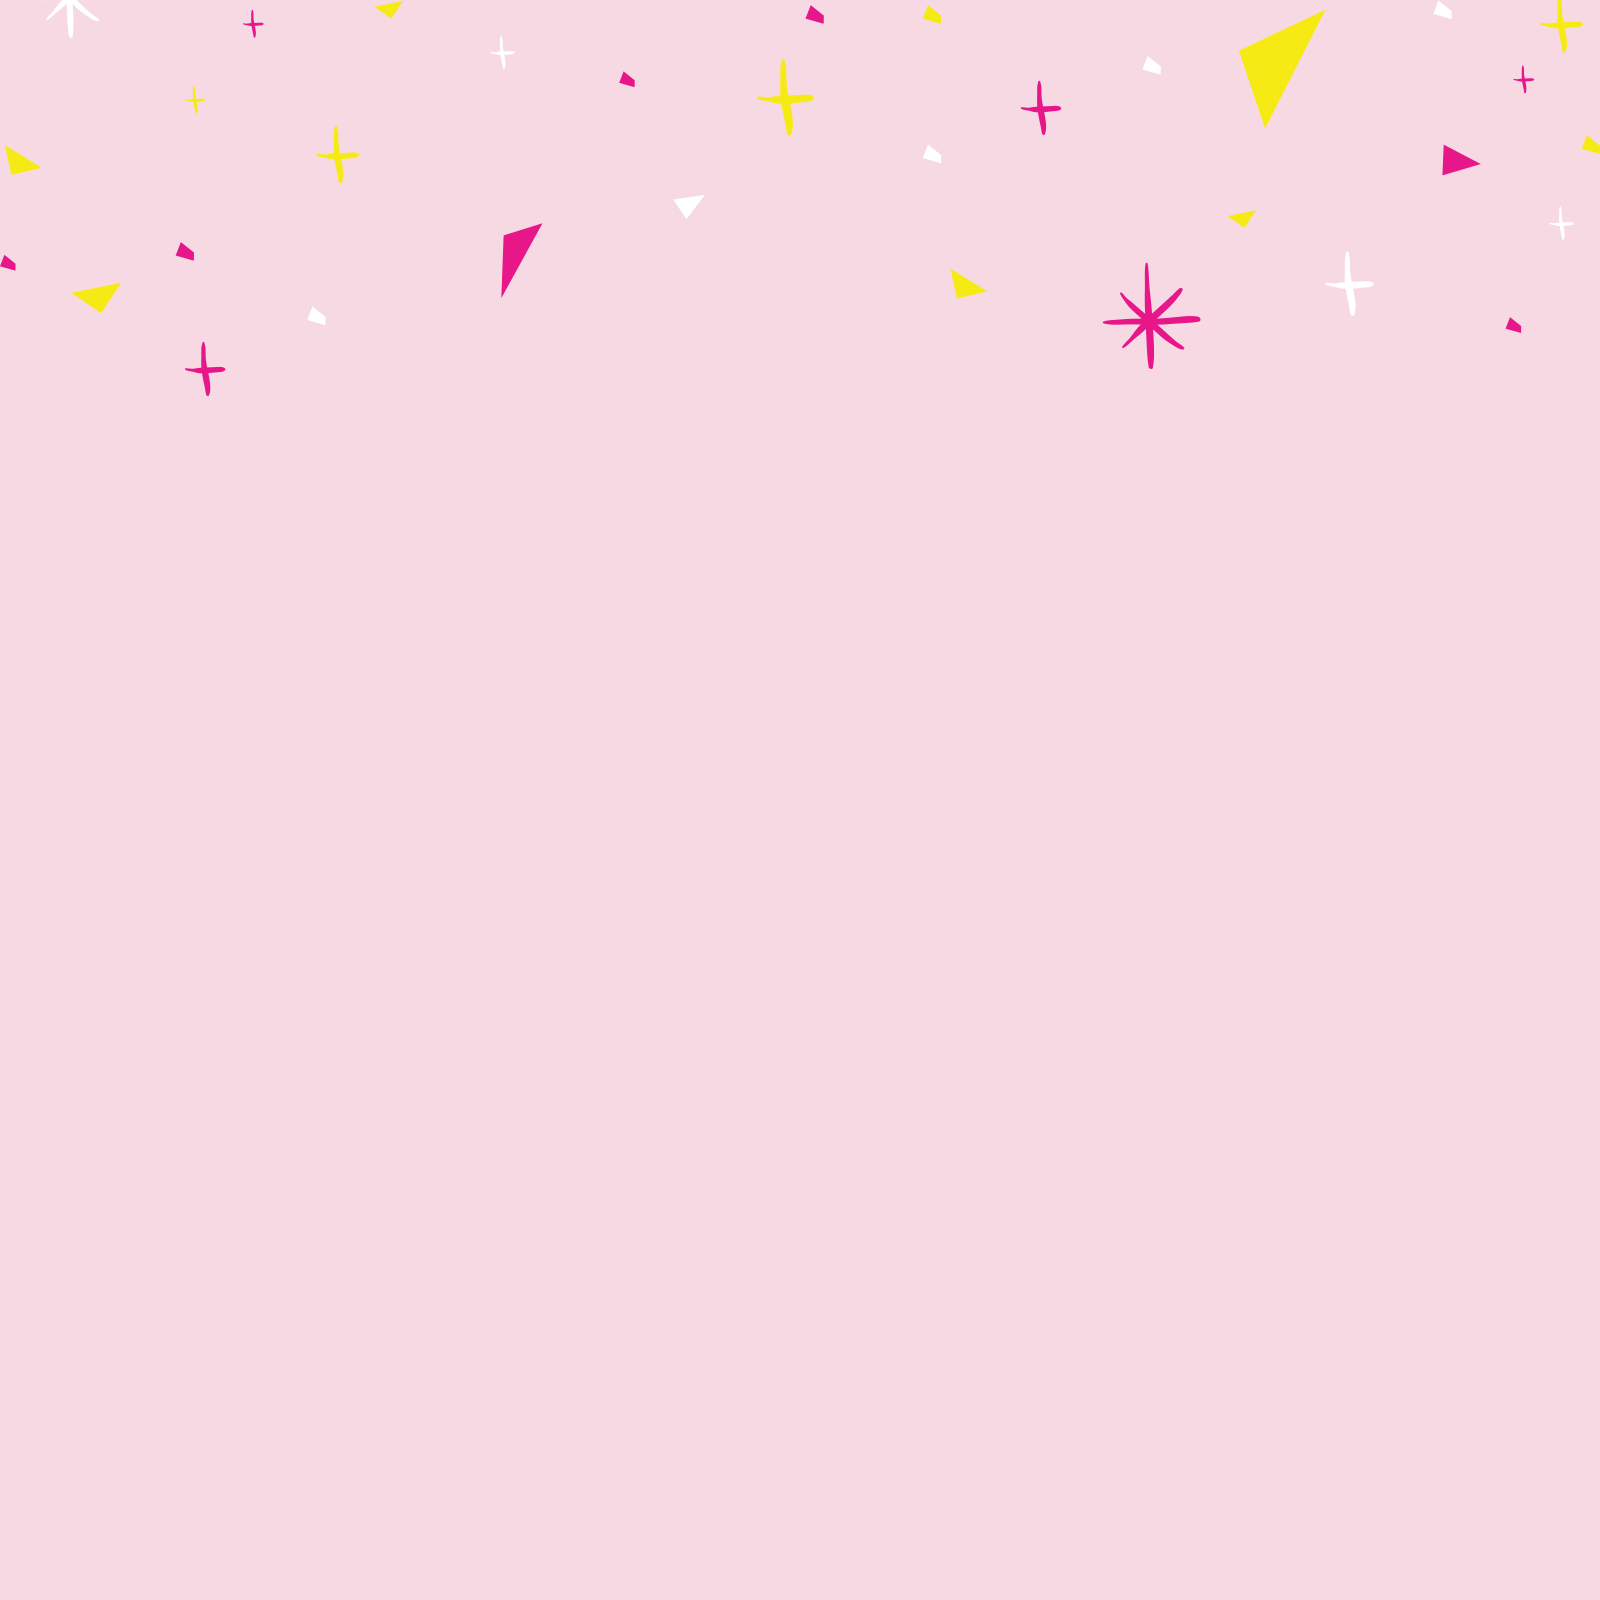 Confetti-Drop-(background-reference).gif